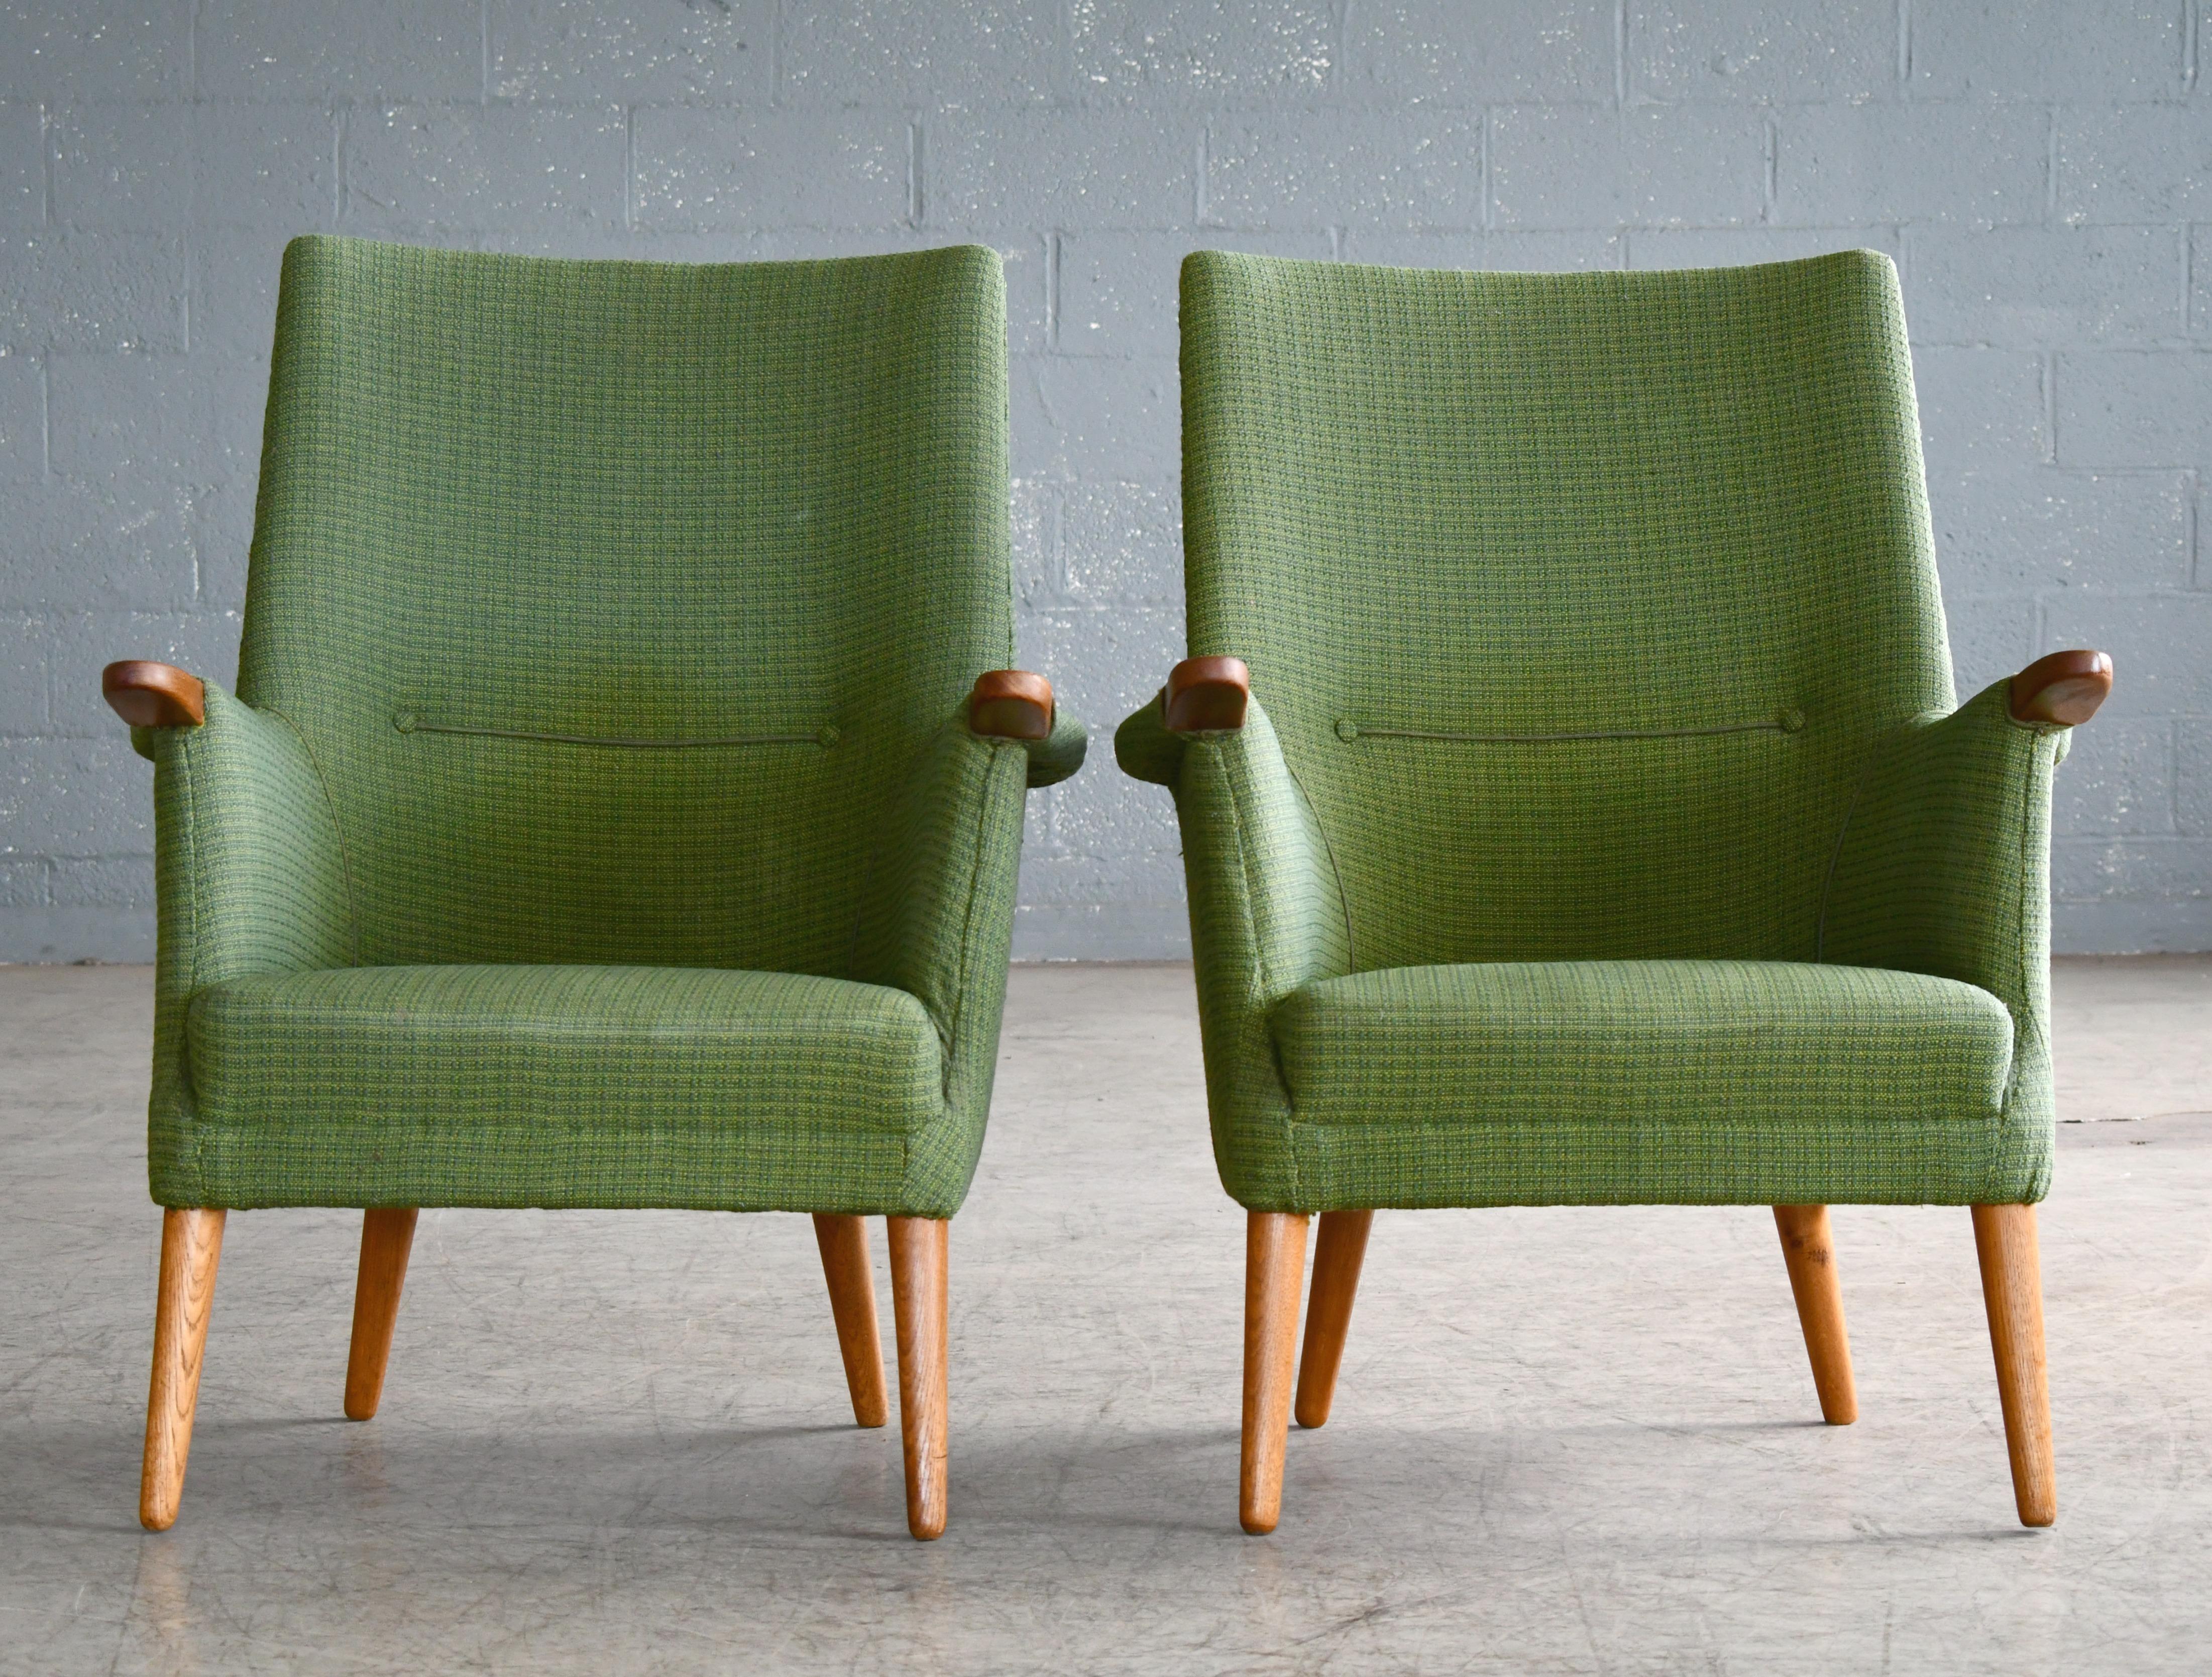 Very charming 1960s pair of lounge chairs in the style of Hans Wegner's mama bear chair designed by Poul M Jessen for PMJ Mobler (chairs marked by the manufacturer). It is a beautiful design with a very similar silhouette and stance to Wegner's